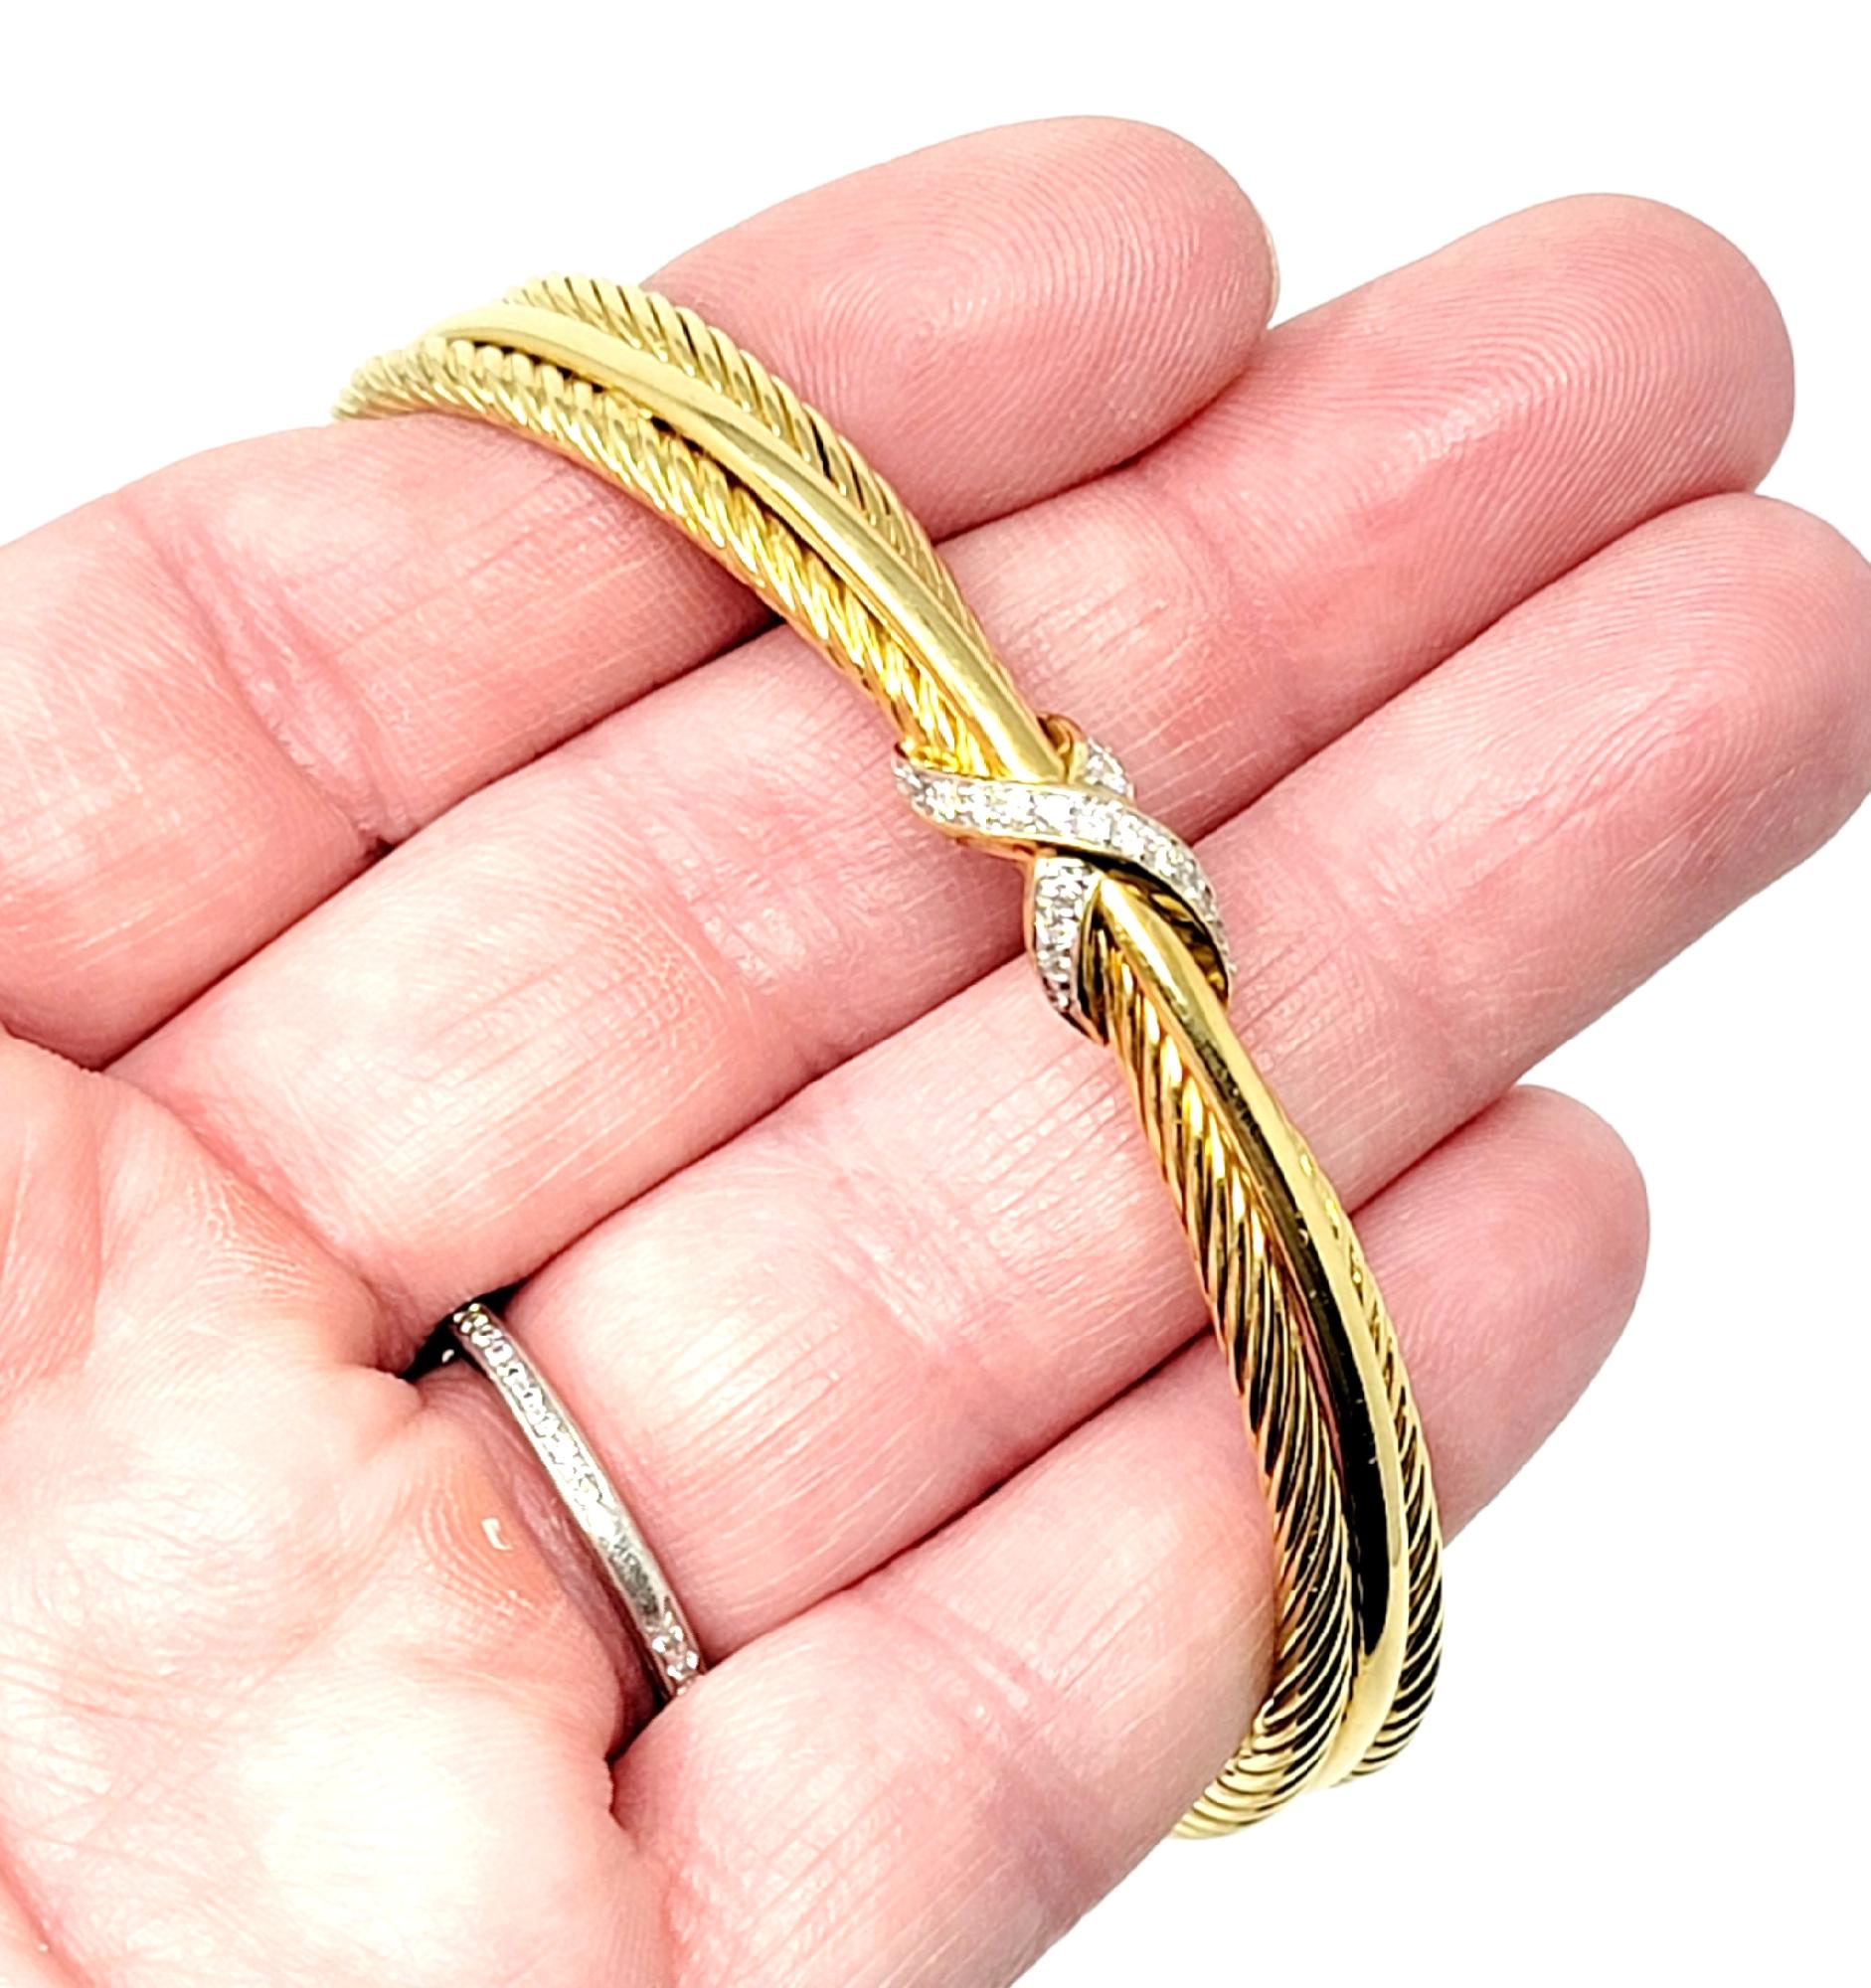 Beautiful modern cuff bracelet by famed designer, David Yurman. This lovely piece can be stacked with other bracelets or worn simply on its own for a touch of understated elegance. The bracelet is made of polished 18 karat yellow gold and features